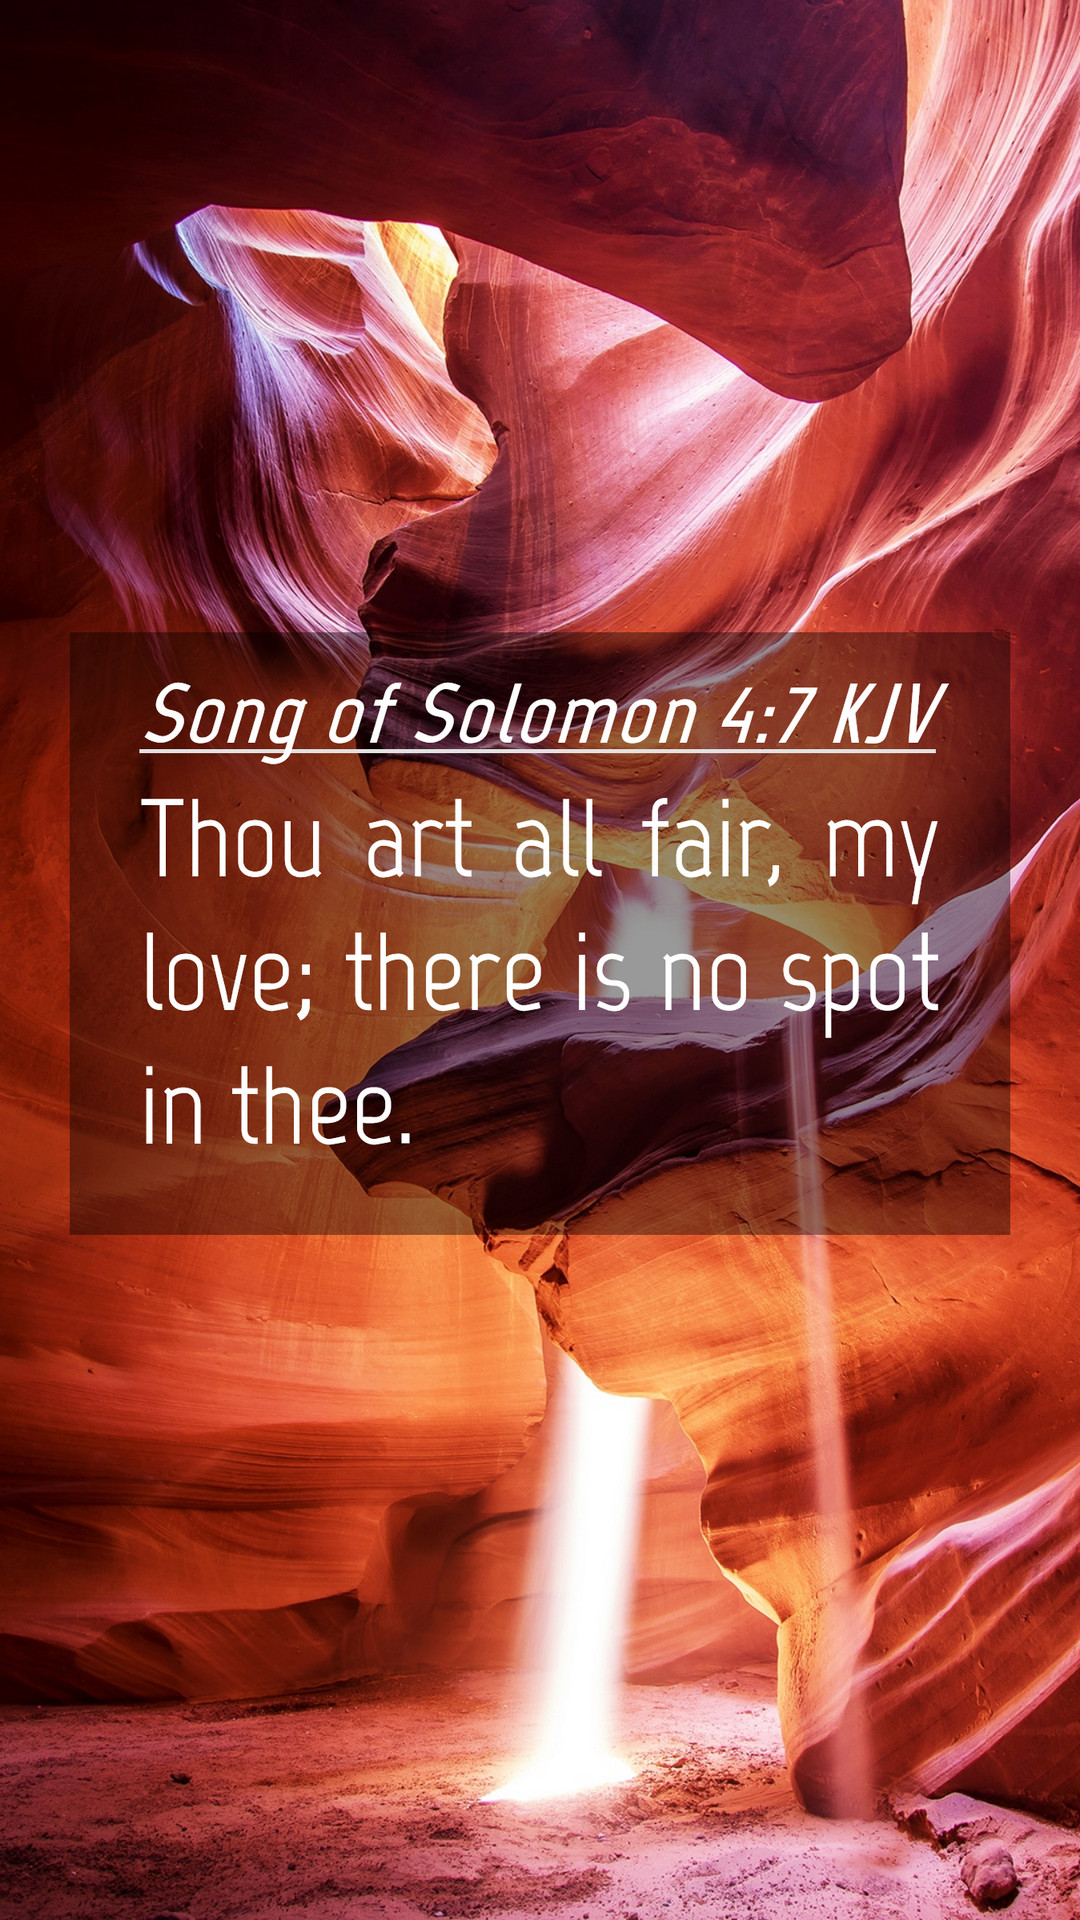 Song of Solomon 4.7 KJV Thou art all fair; my love; there is no in thee. spot